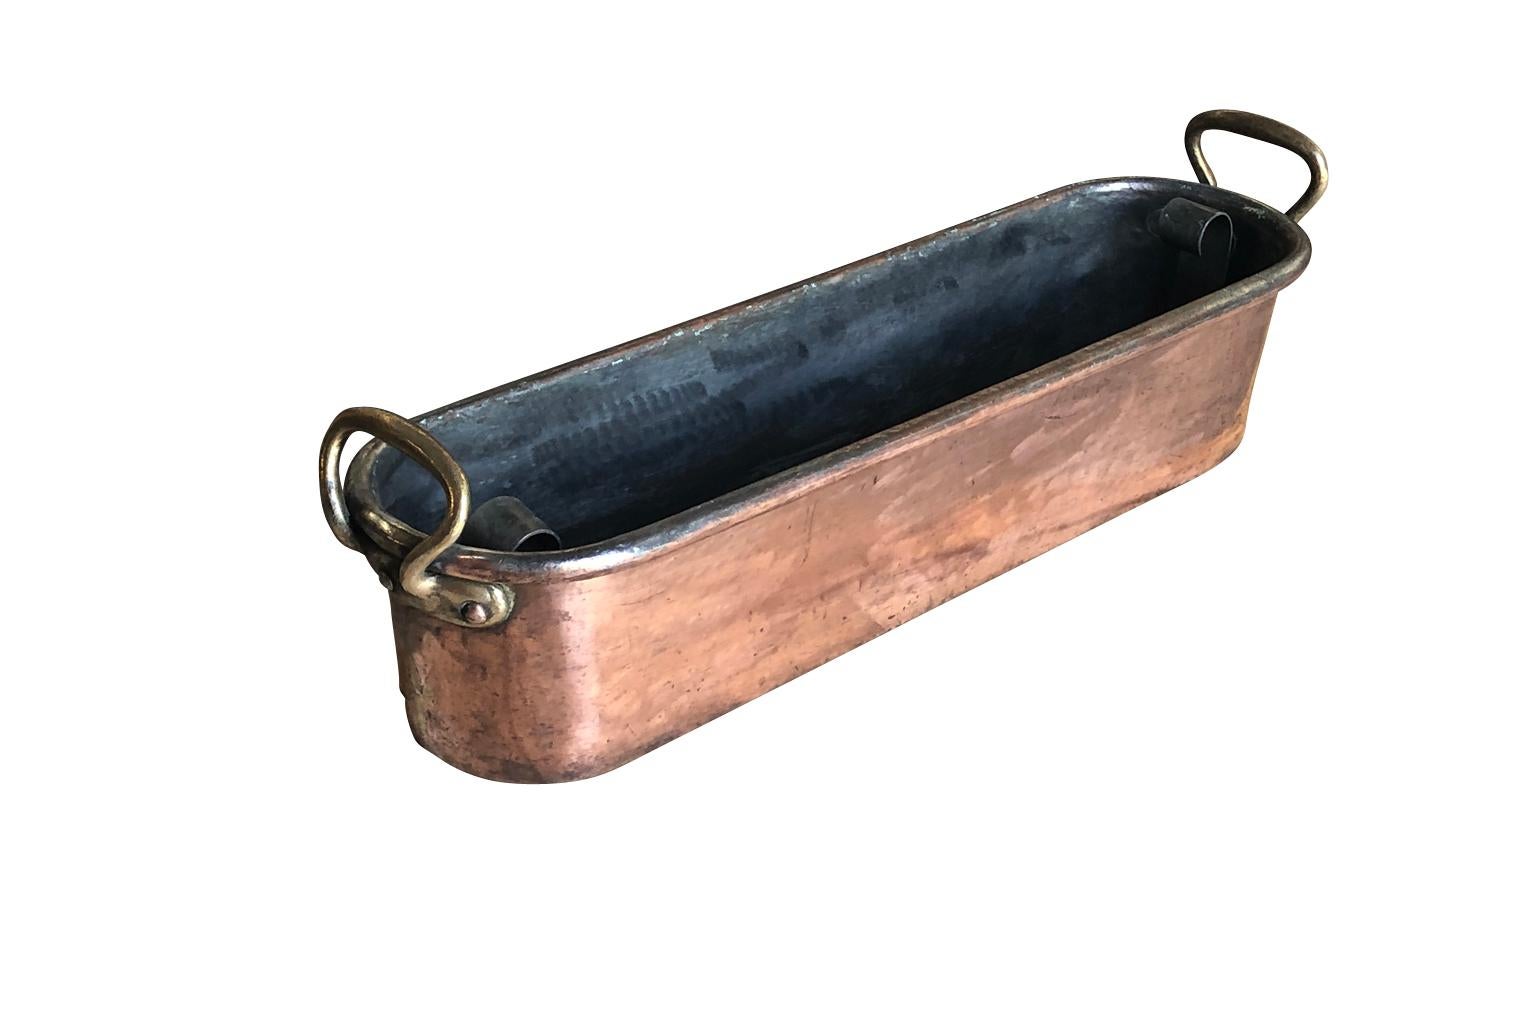 A large 18th century fish pan in copper from the South of France. The pan retains its original poaching tray. Five wholes have been punched into the bottom of the pan.  Wonderful quality. A great addition to a copperware collection.